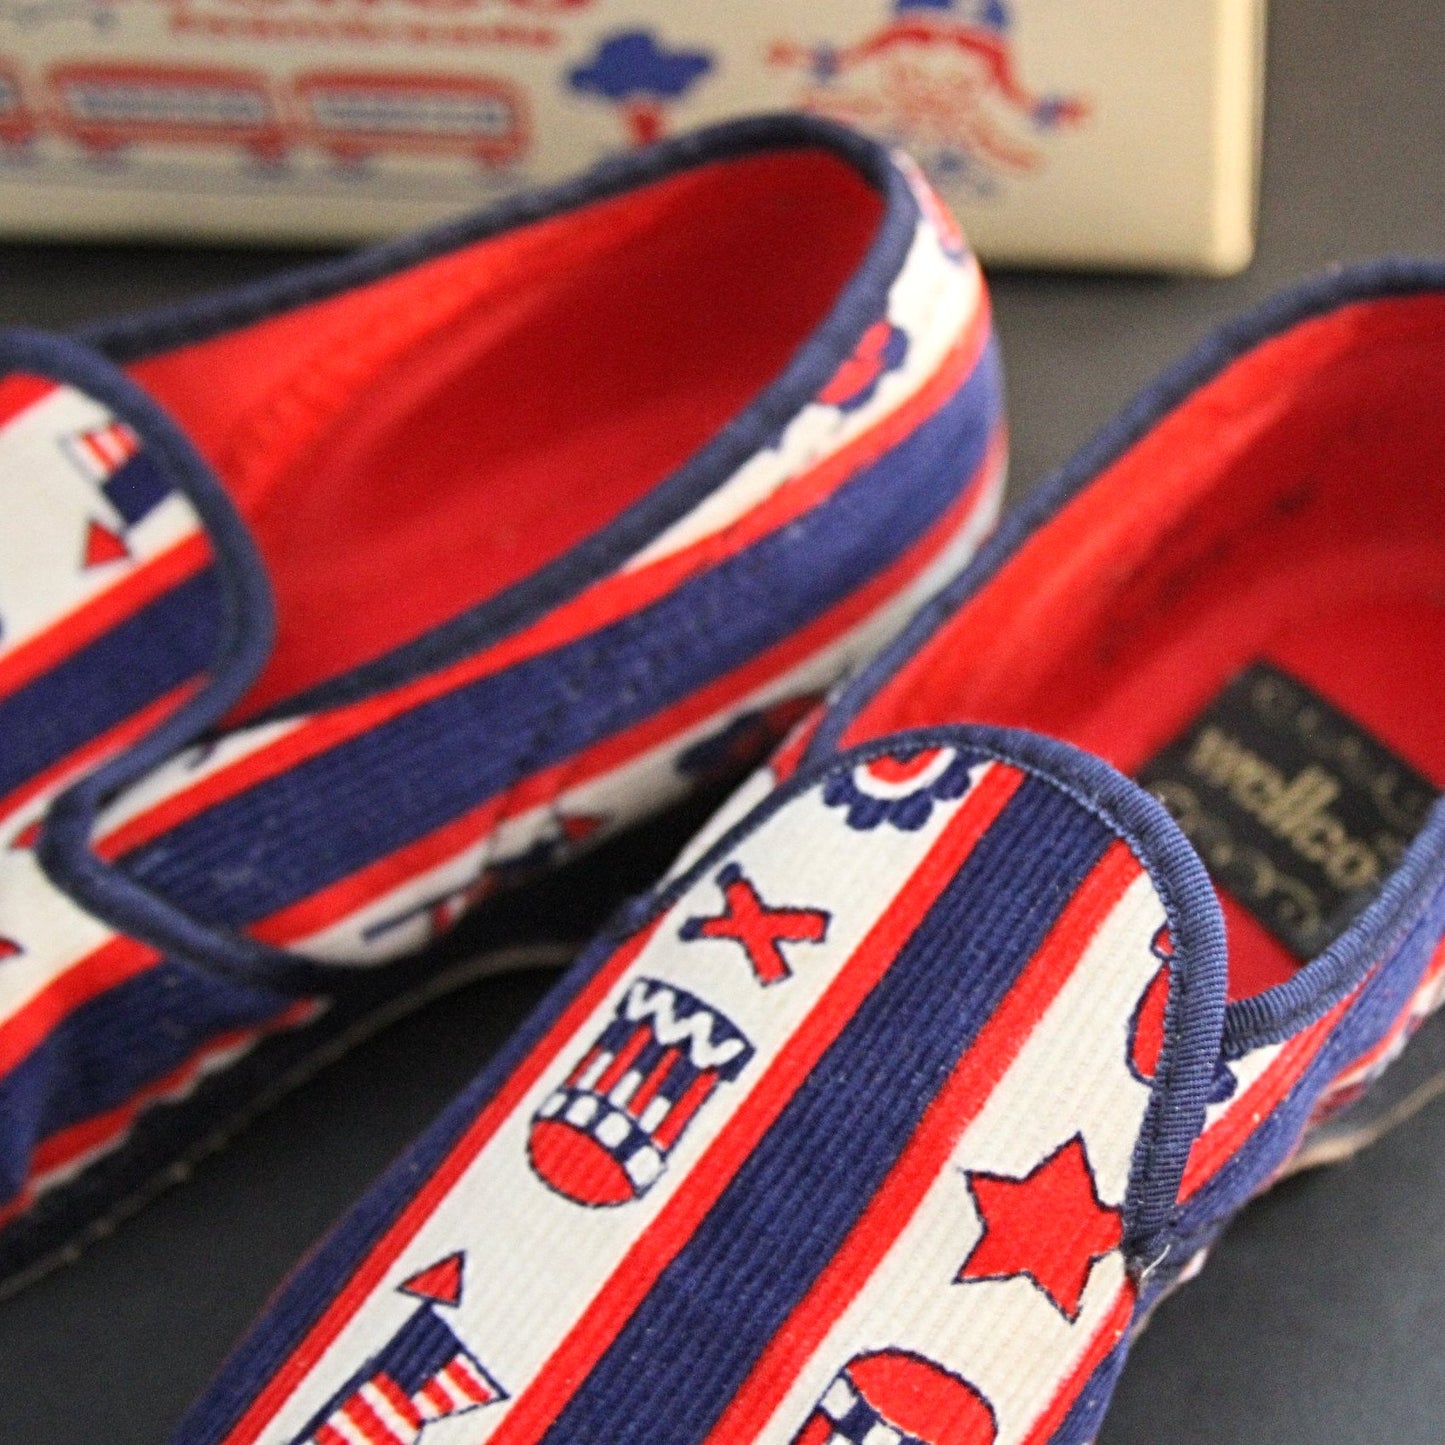 WELLCO FOAMTREADS '76 BICENTENNIAL Stars and Stripes Corduroy Slippers New Old Stock with Box